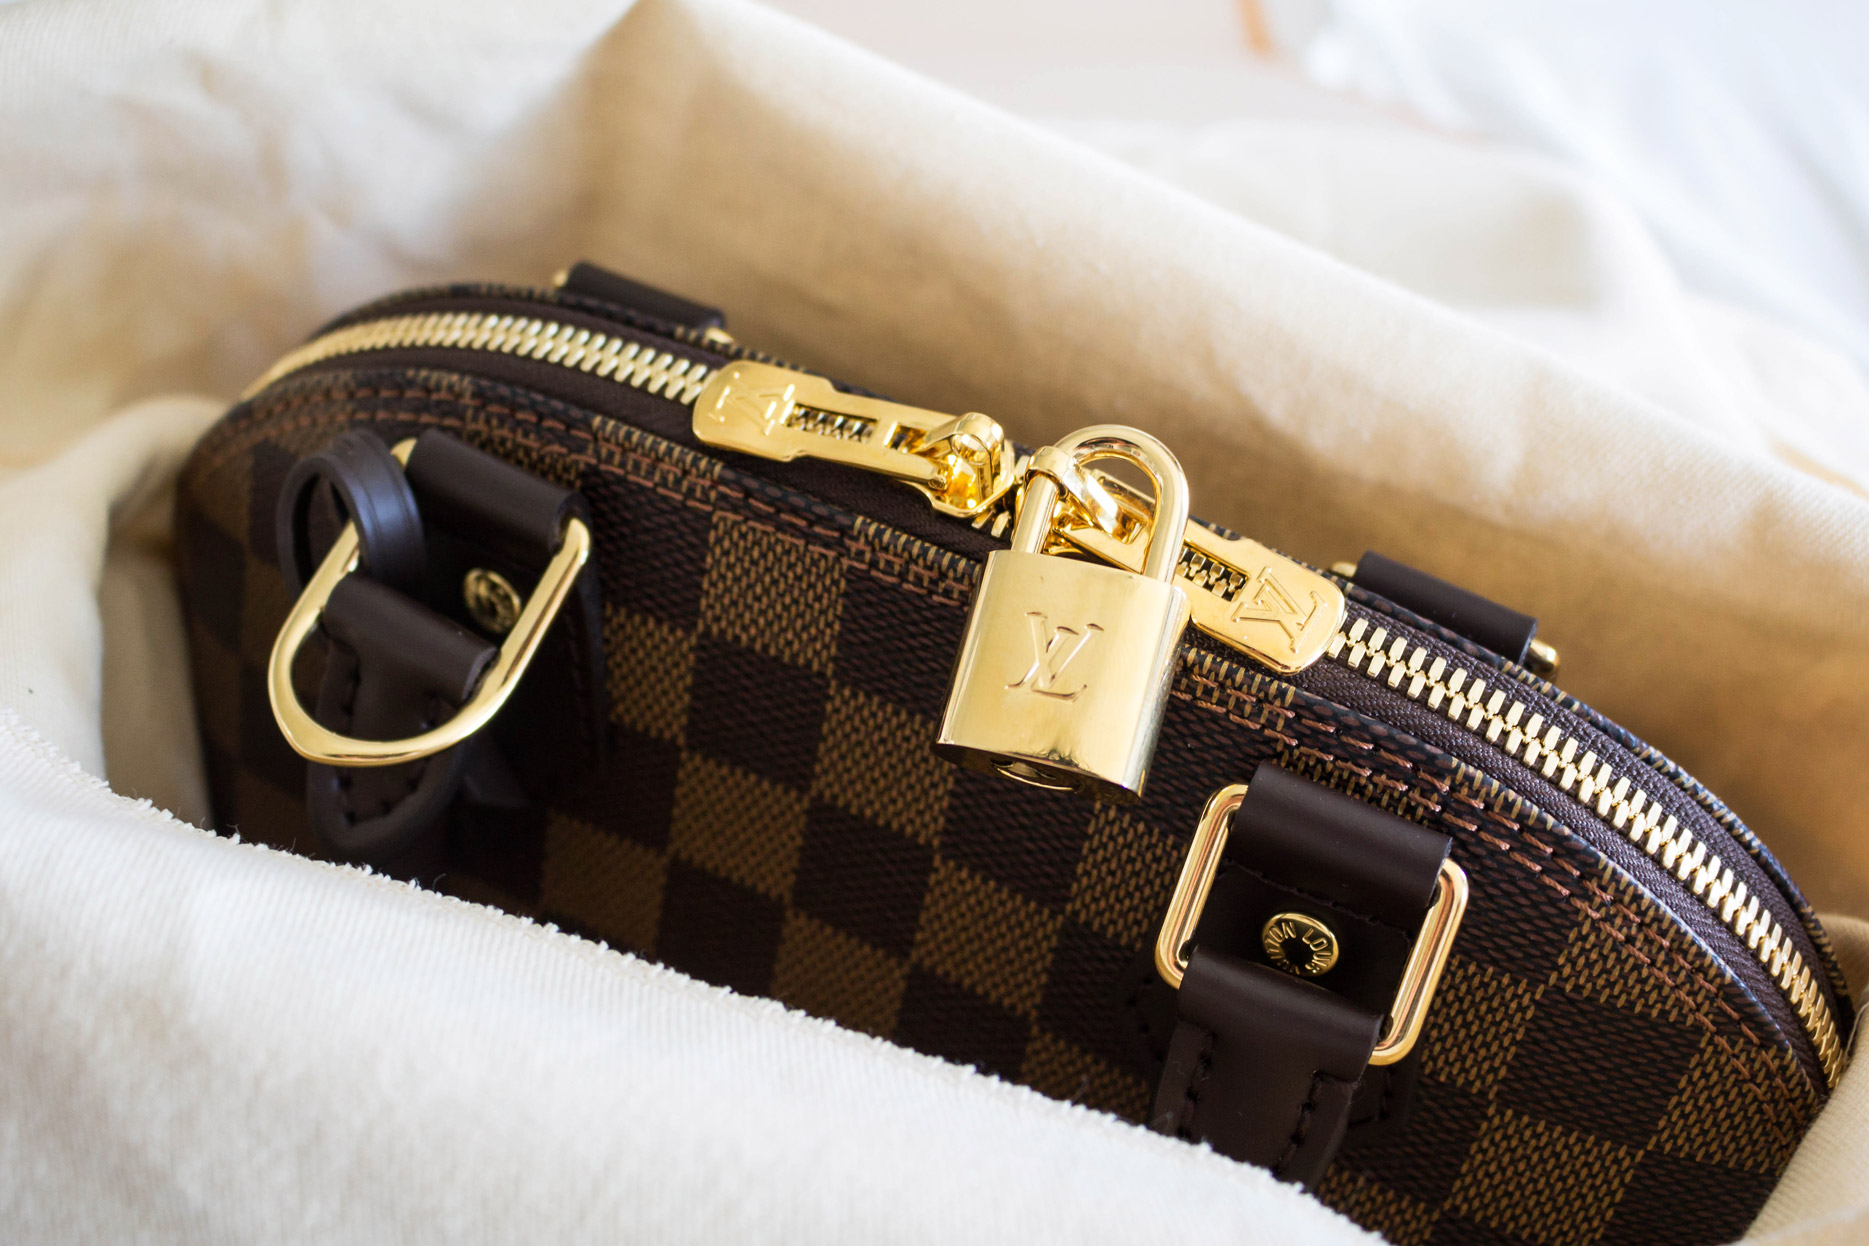 Unveiling My Louis Vuitton Alma BB and Tips on Buying/Sourcing Luxury Goods